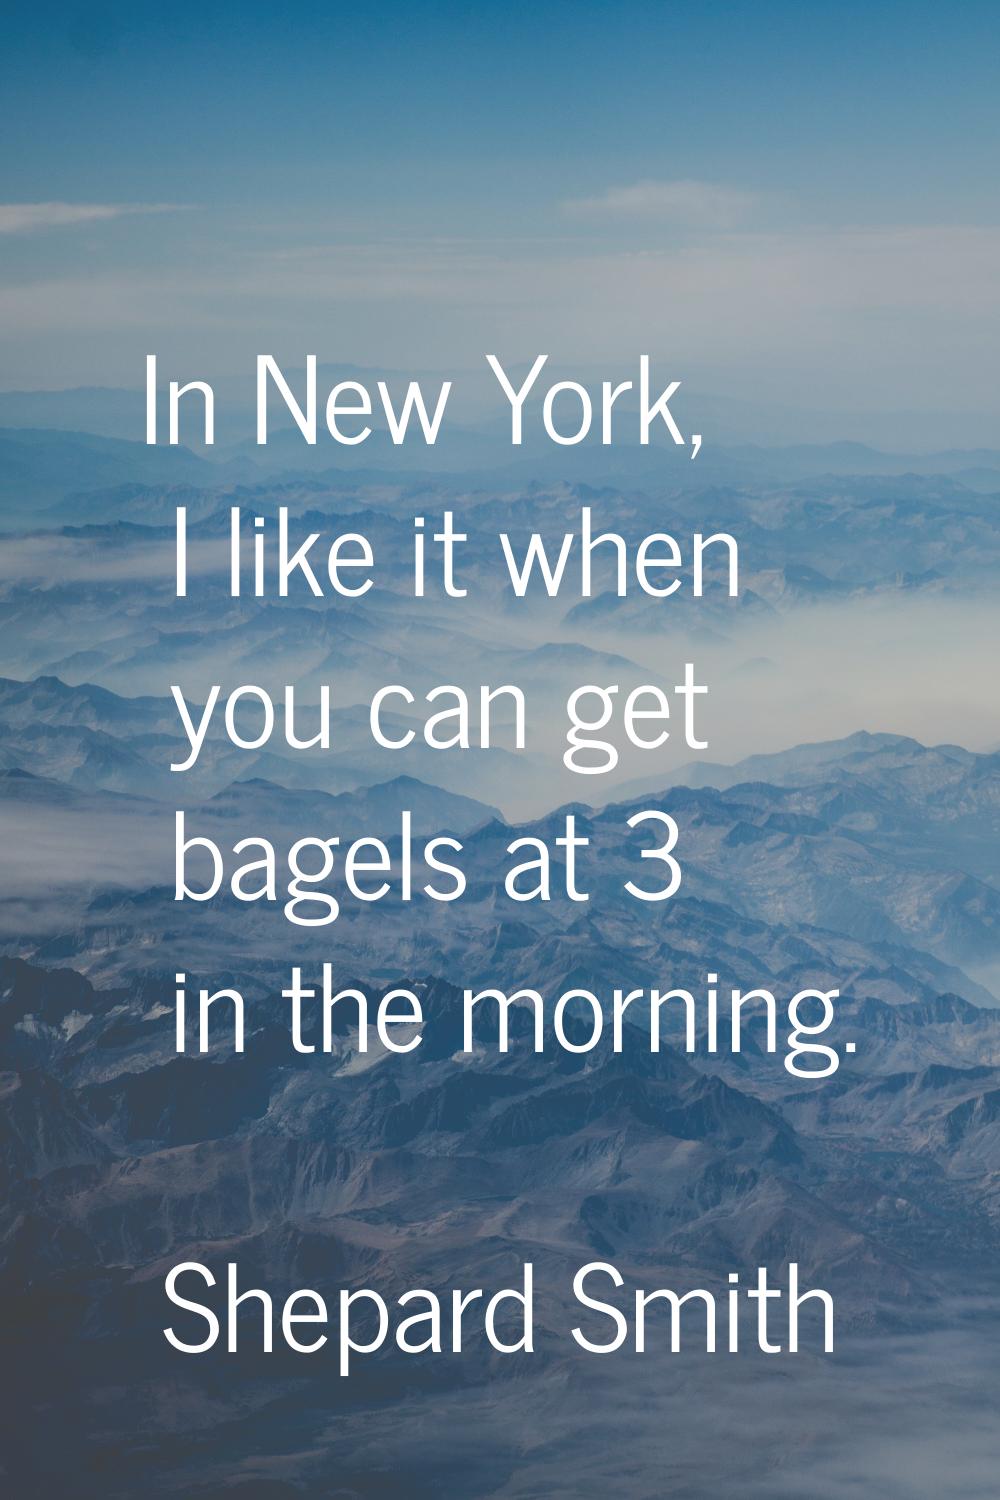 In New York, I like it when you can get bagels at 3 in the morning.